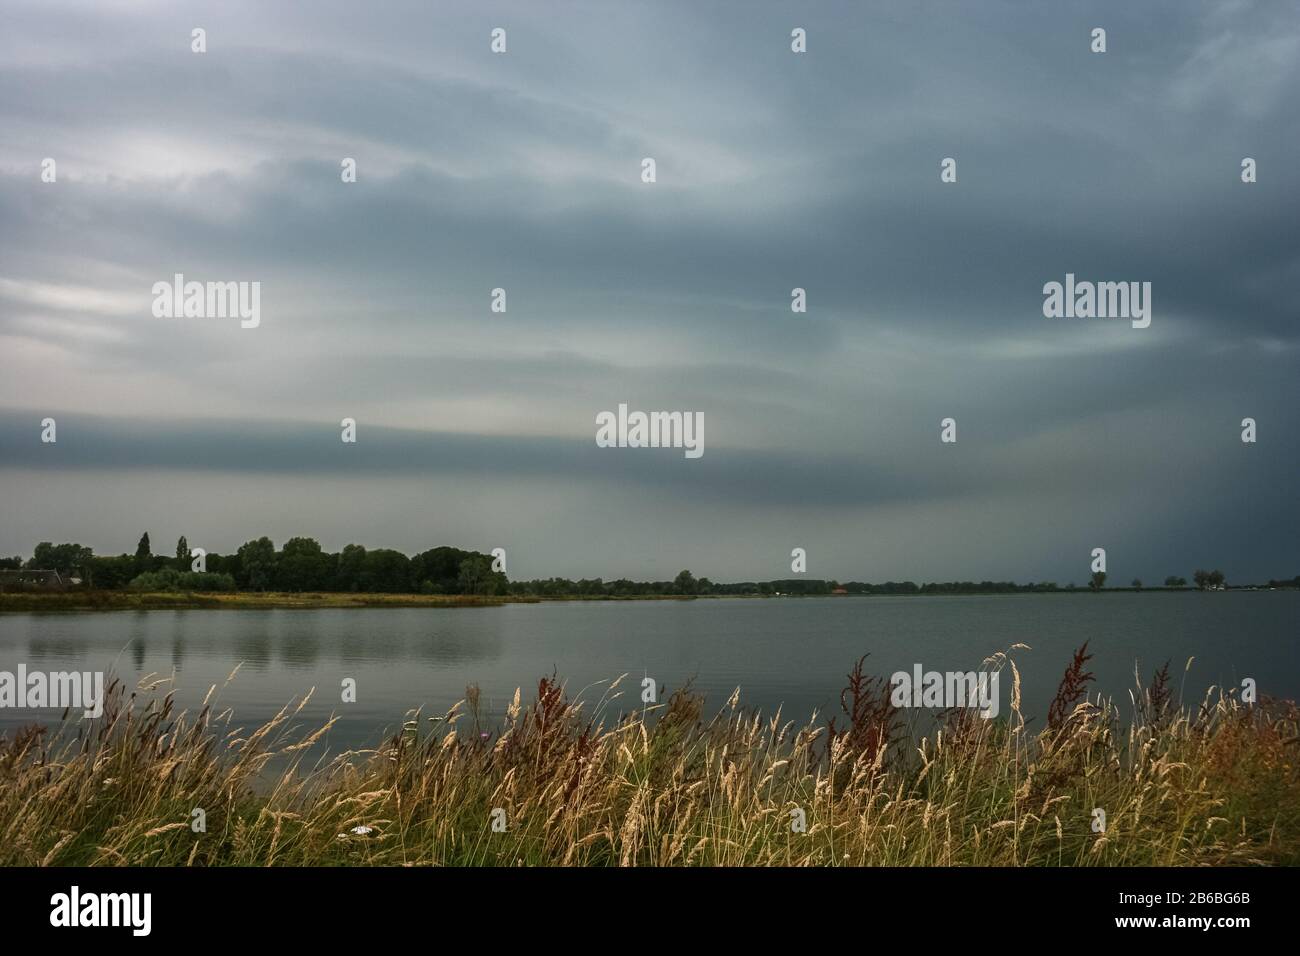 Thunderstorm with smooth laminar shelfcloud over a lake in the Netherlands Stock Photo